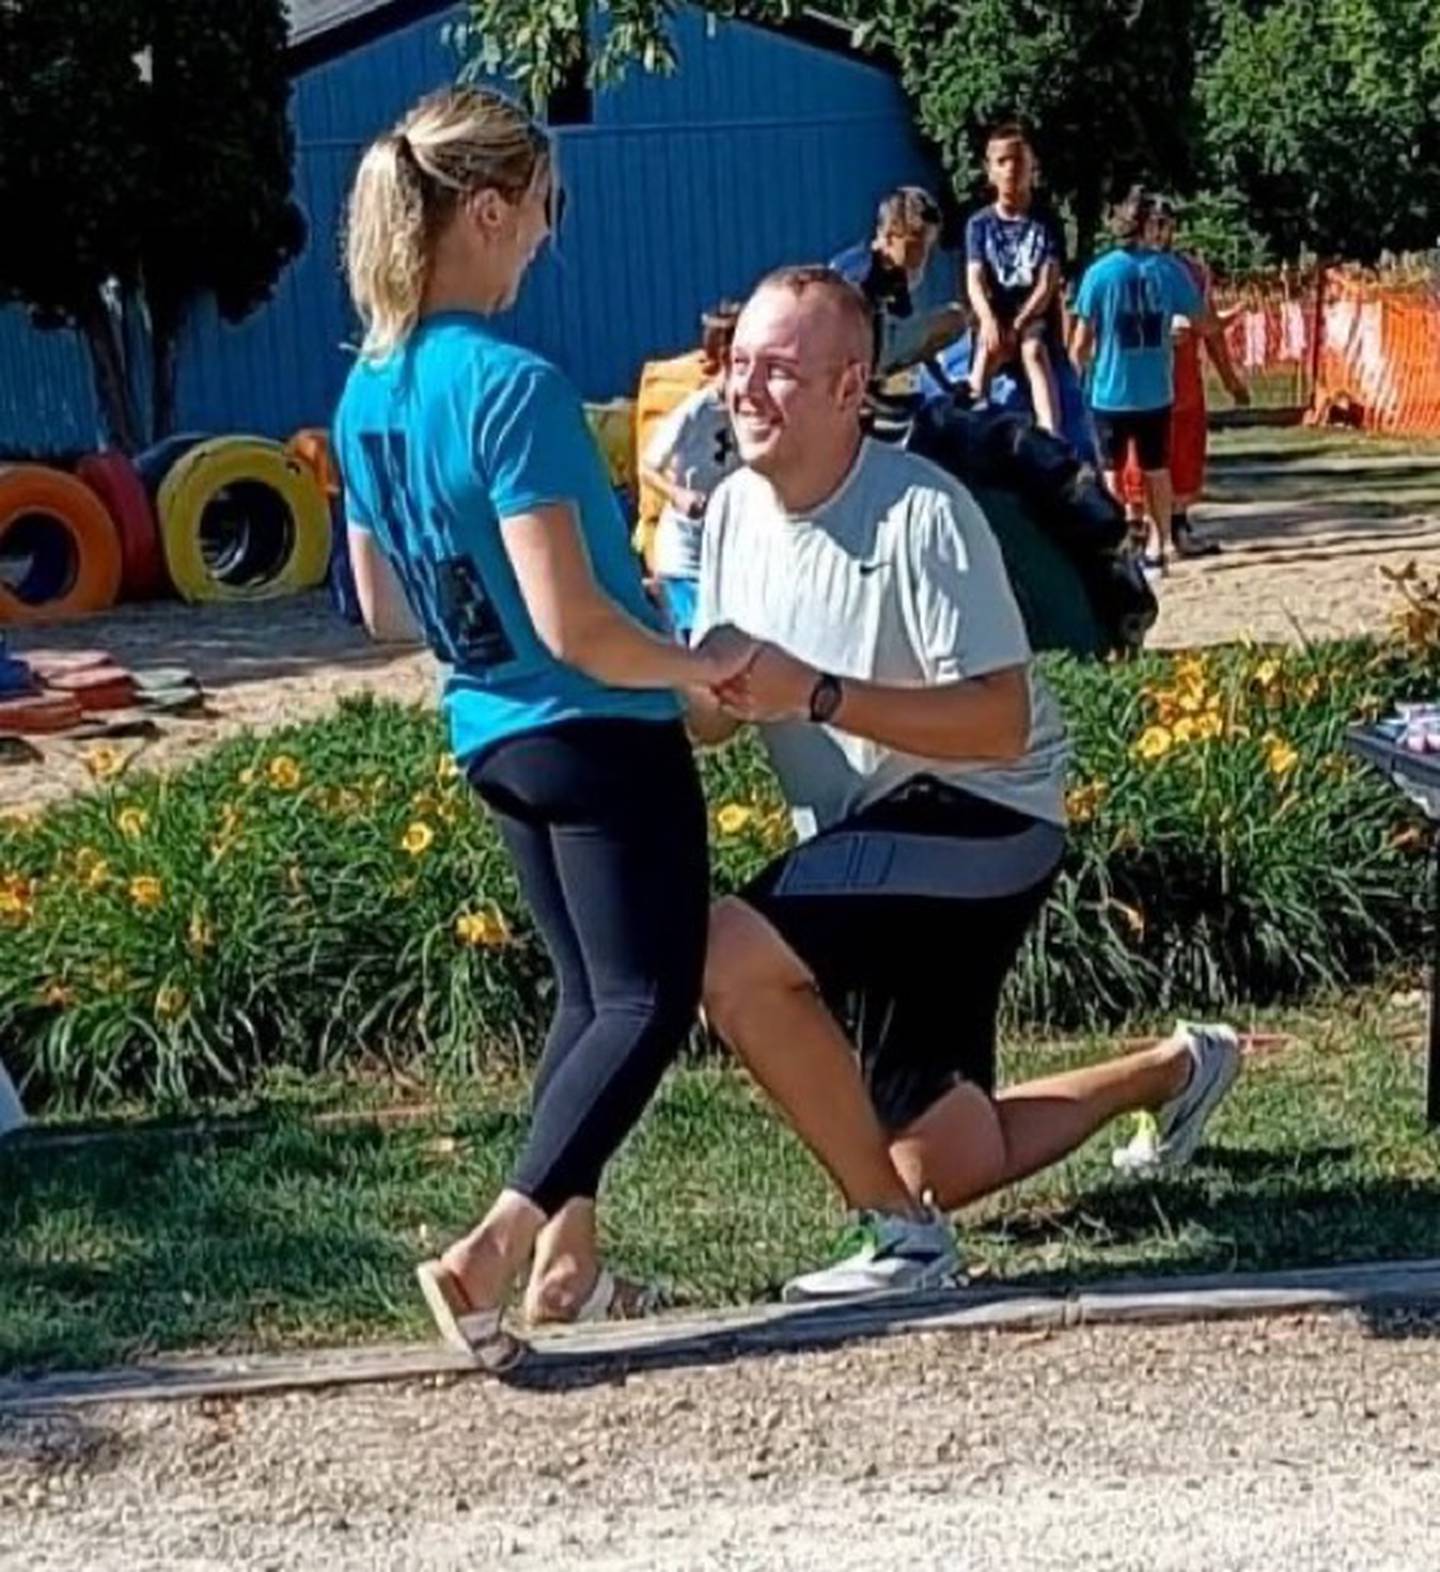 Hillary Monier came to Saturday's Walnut 5K for ALS as race co-director and left with a ring on her finger. Her boyfriend, Rhys Childs, propose to Monier during the event.